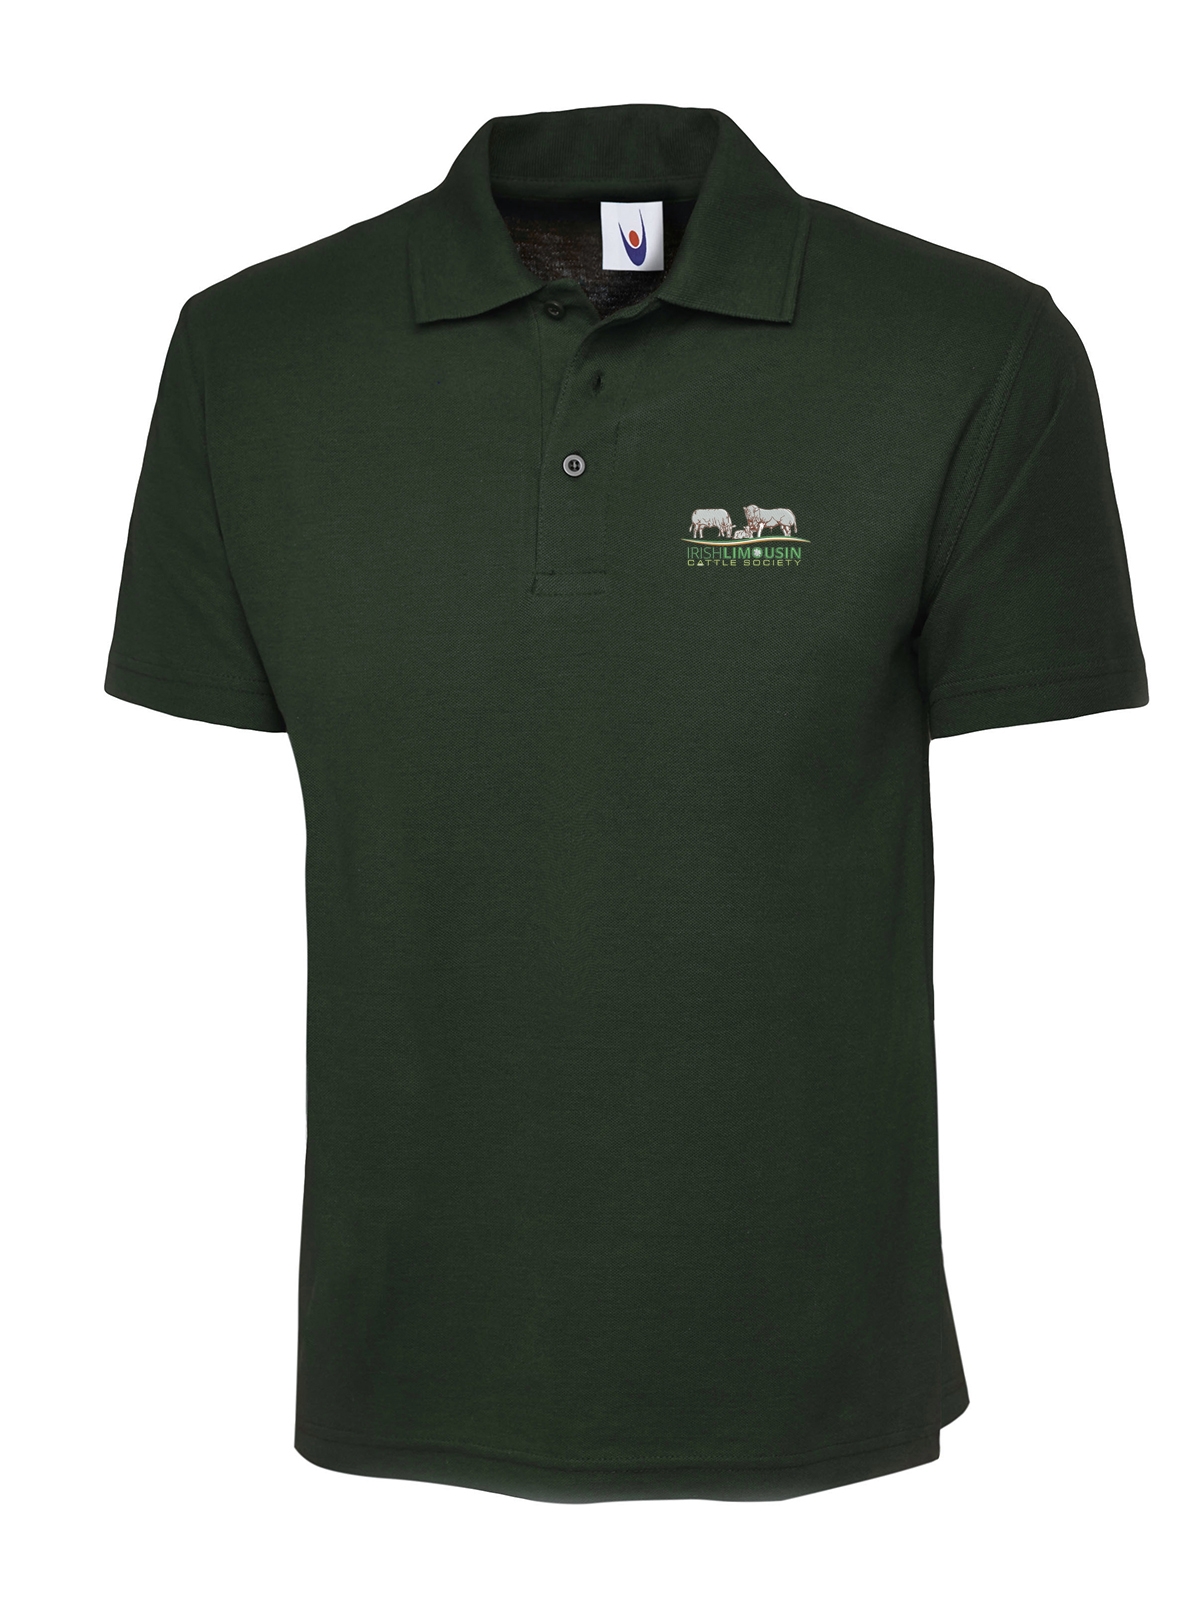 products-irish_limousin_uc101_adult_bottle_green_polo